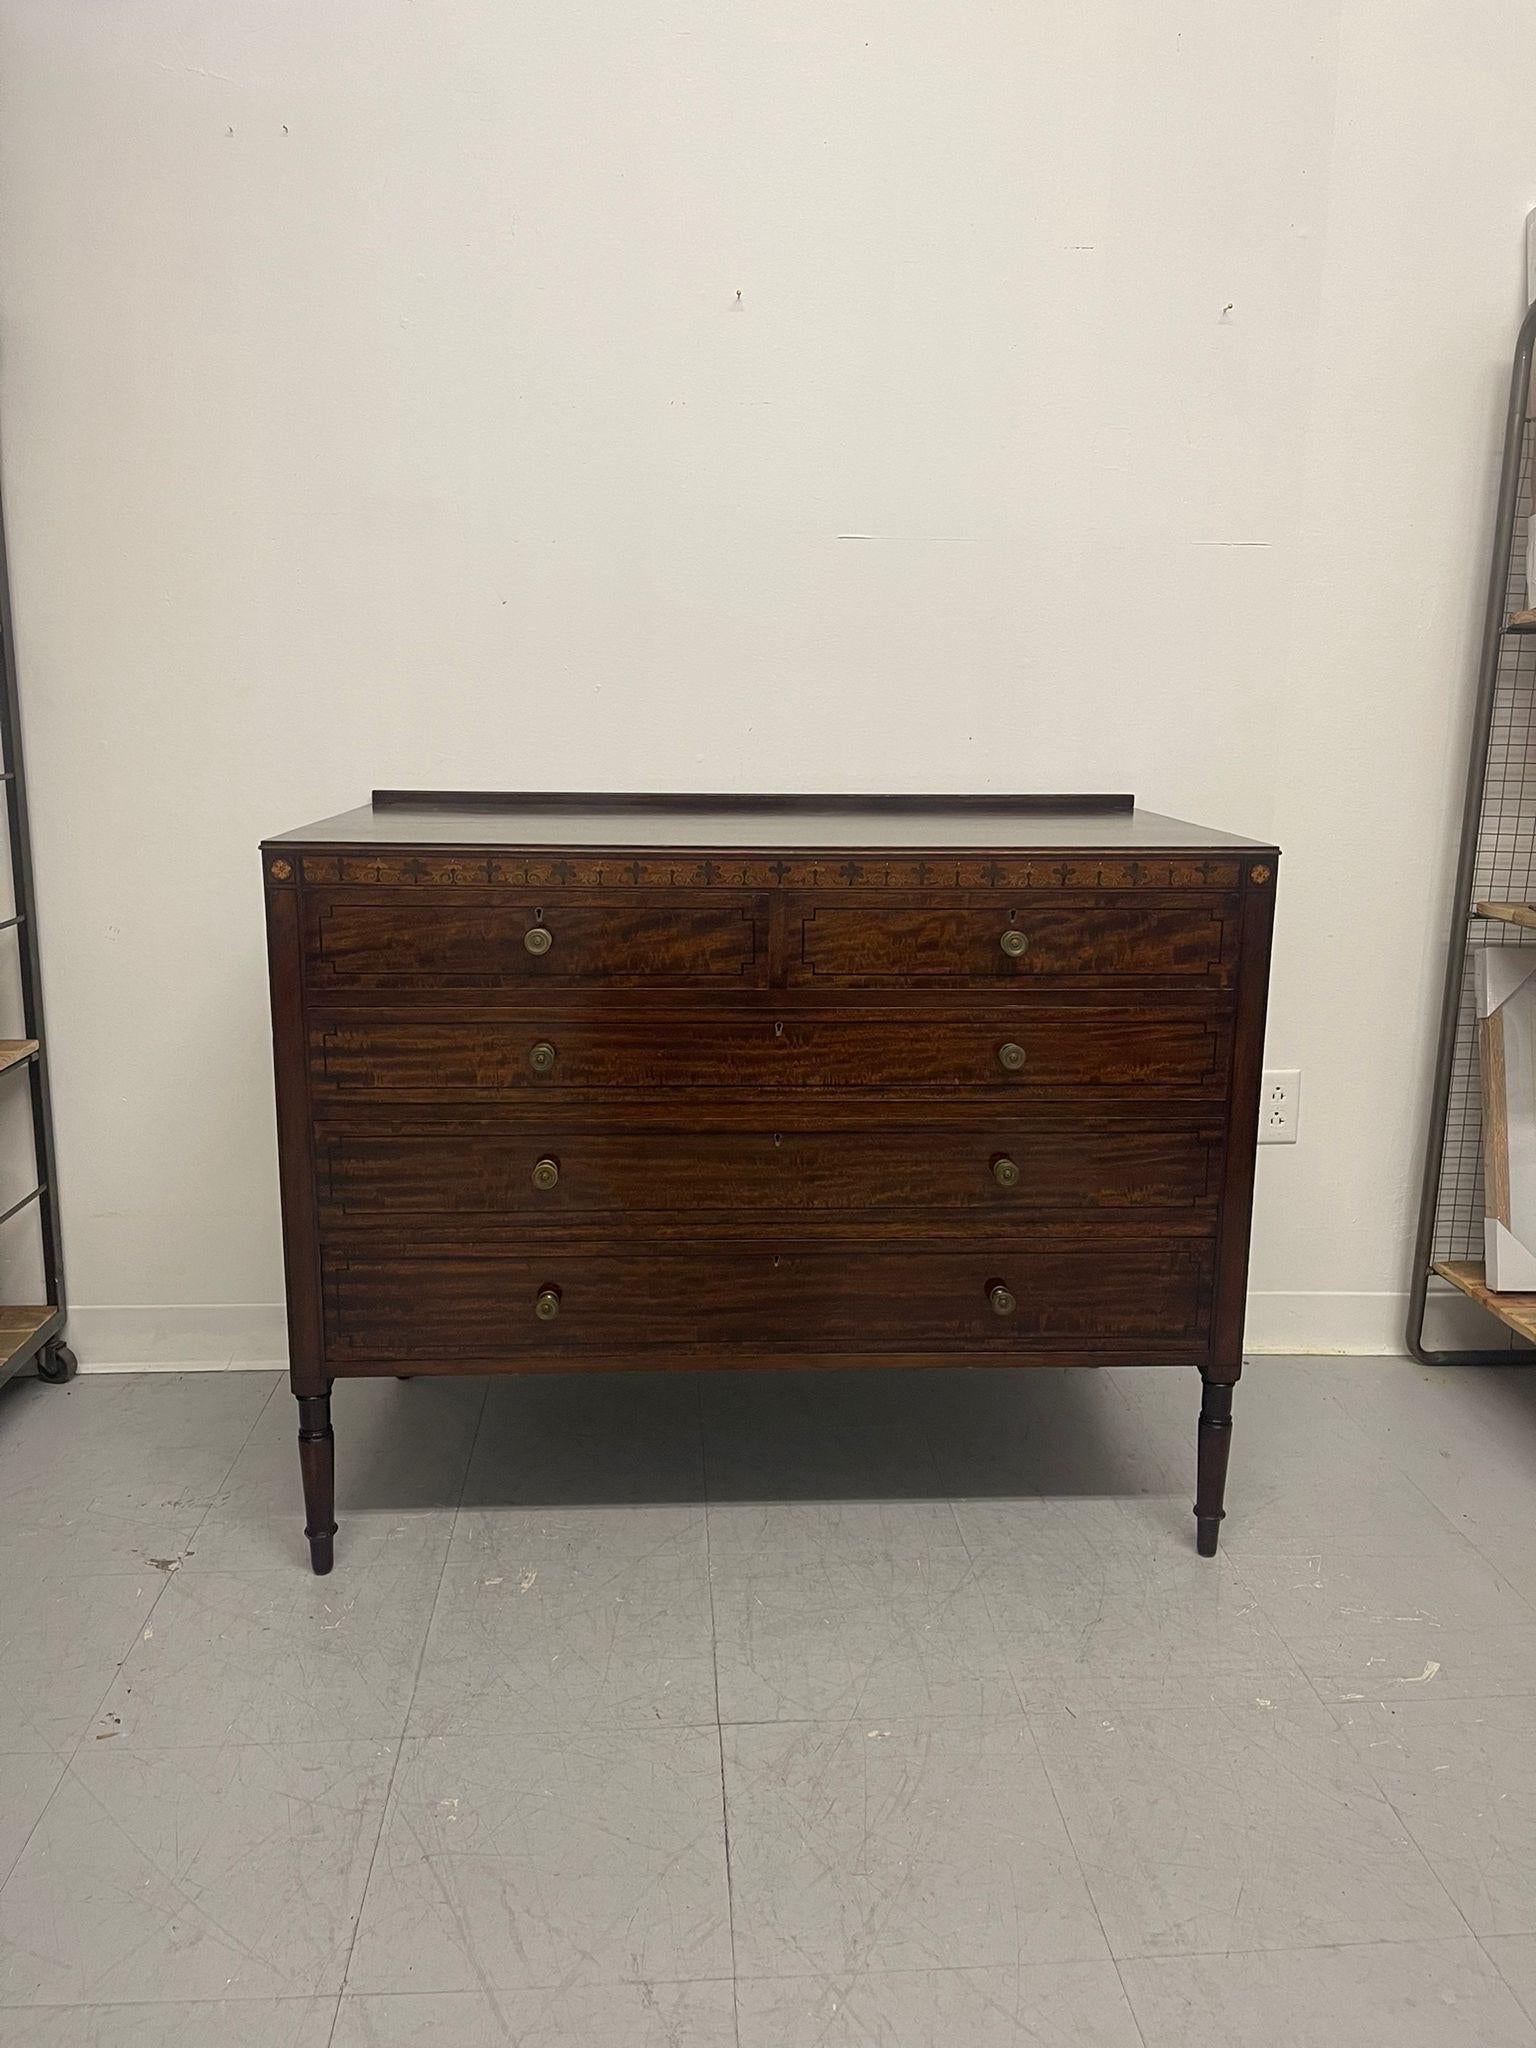 This Antique Dresser has Original Hardware and Dovetailed Drawers. Turned Would Legs, the Wood on this Piece is possibly Mahogany. Finished Back and Interiors to the Drawers as Pictured. Nice Grain to the Wood. Intricate Wood Inlay Feature Appears